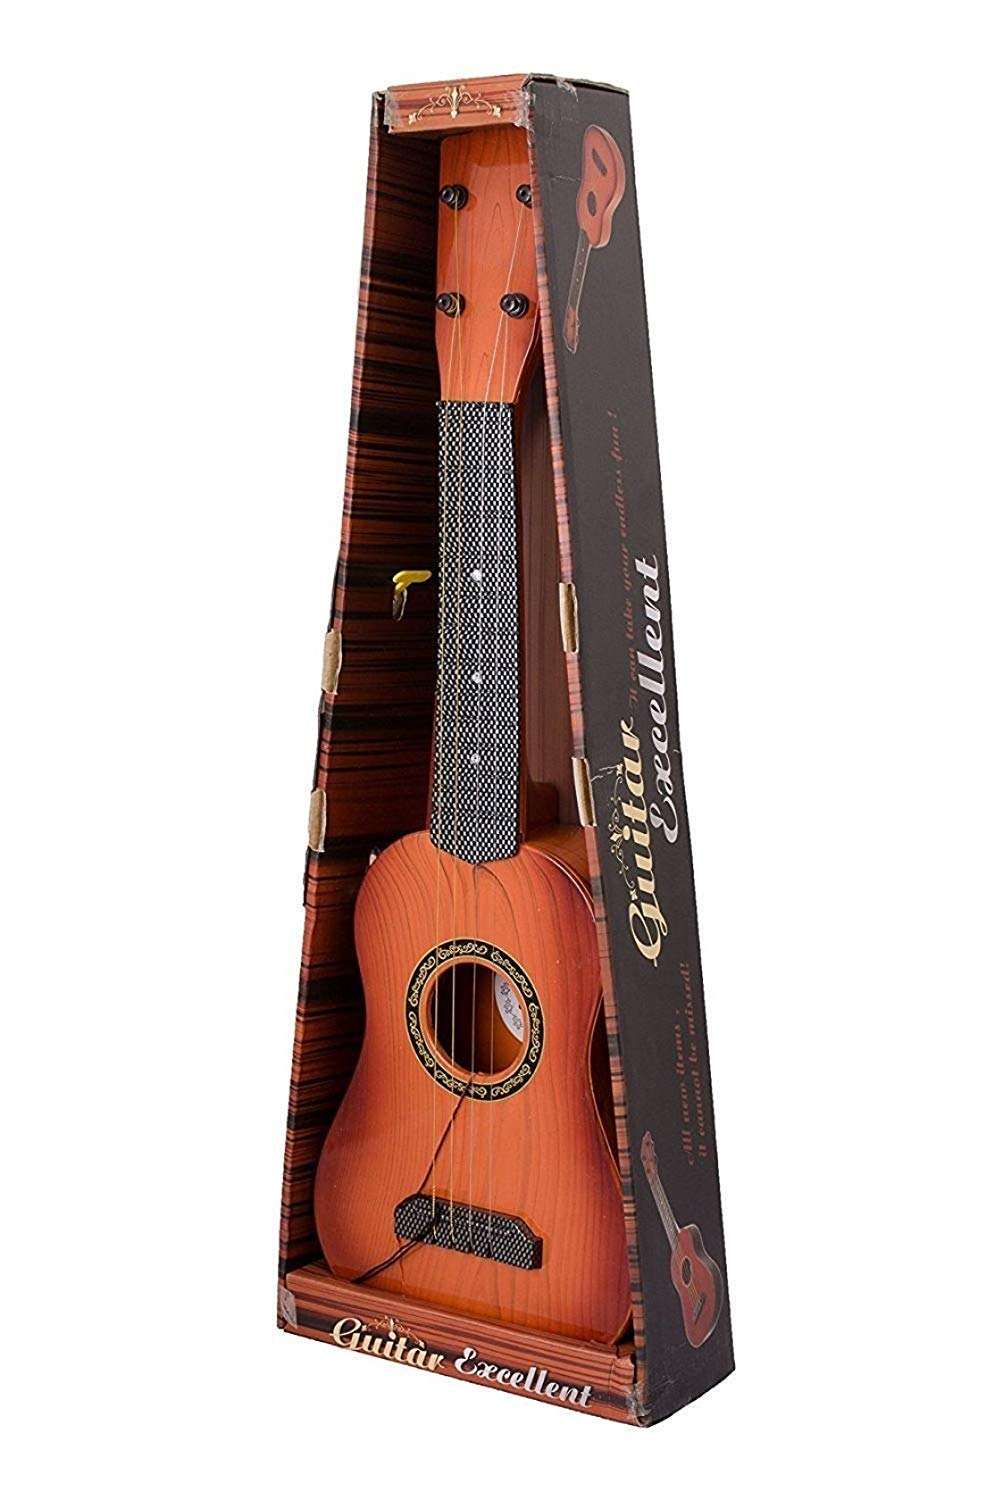 AZi 4-String Classical Guitar Toy for Kids